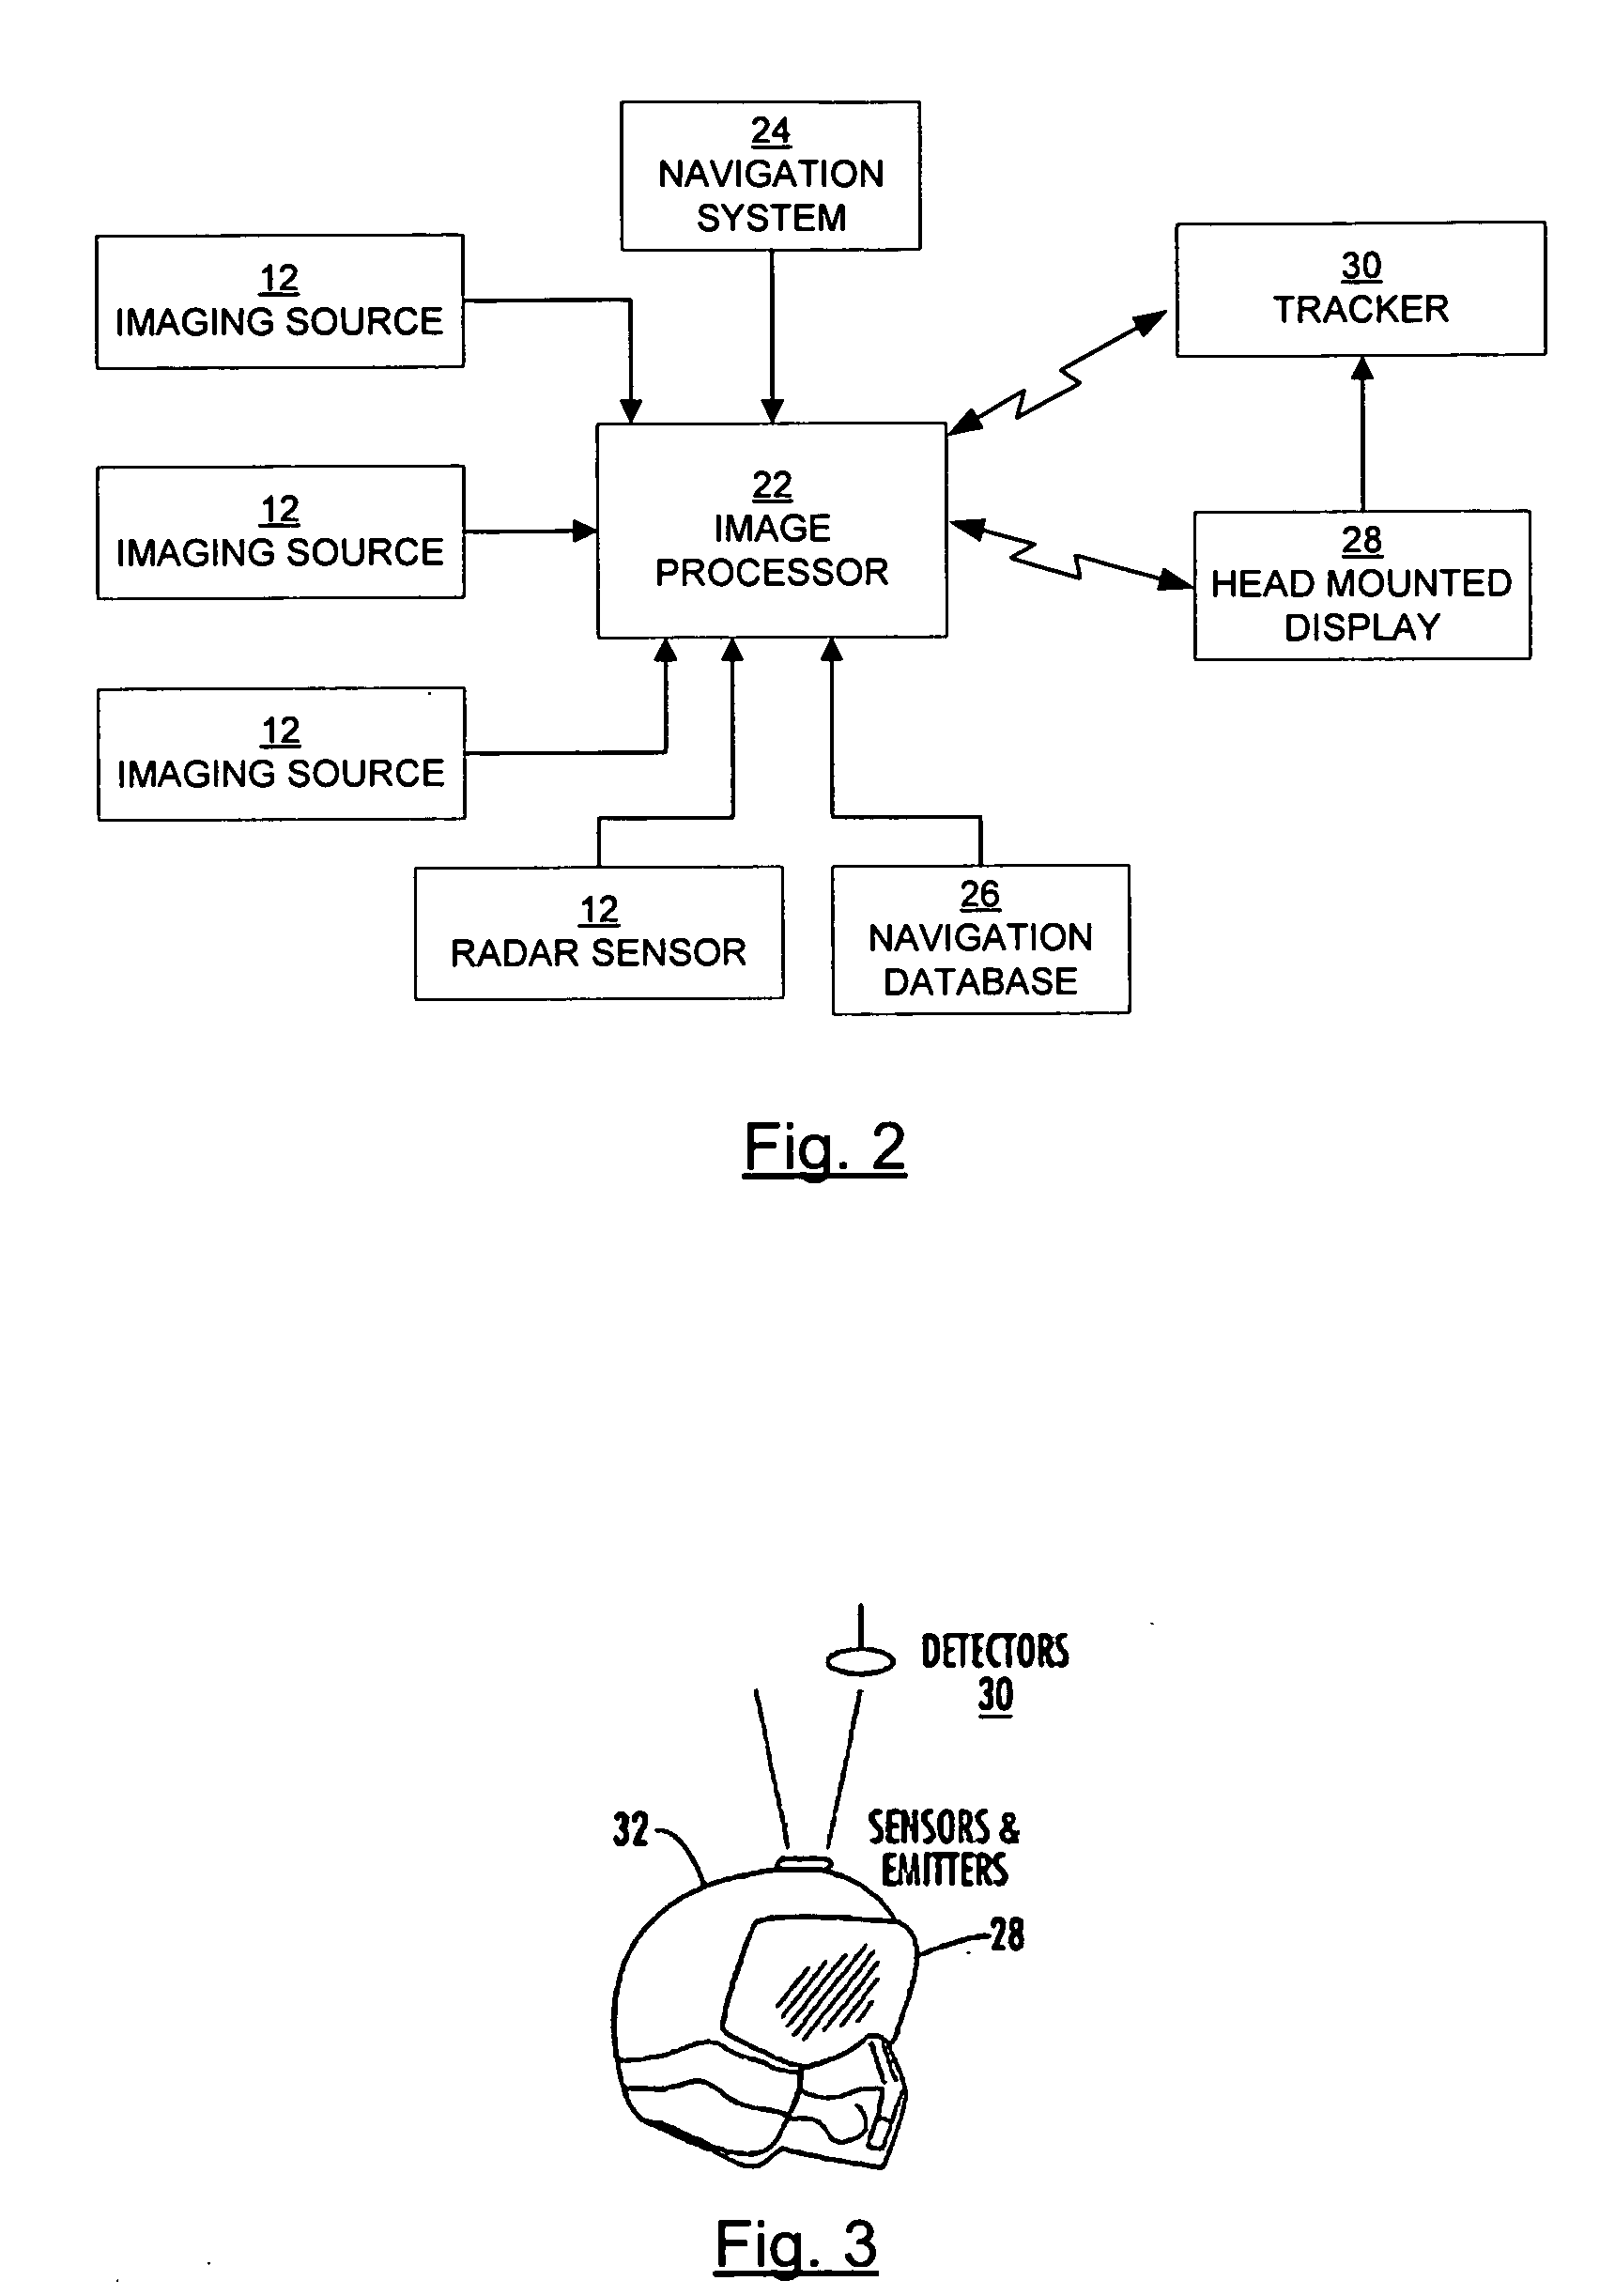 Systems and methods for remote display of an enhanced image